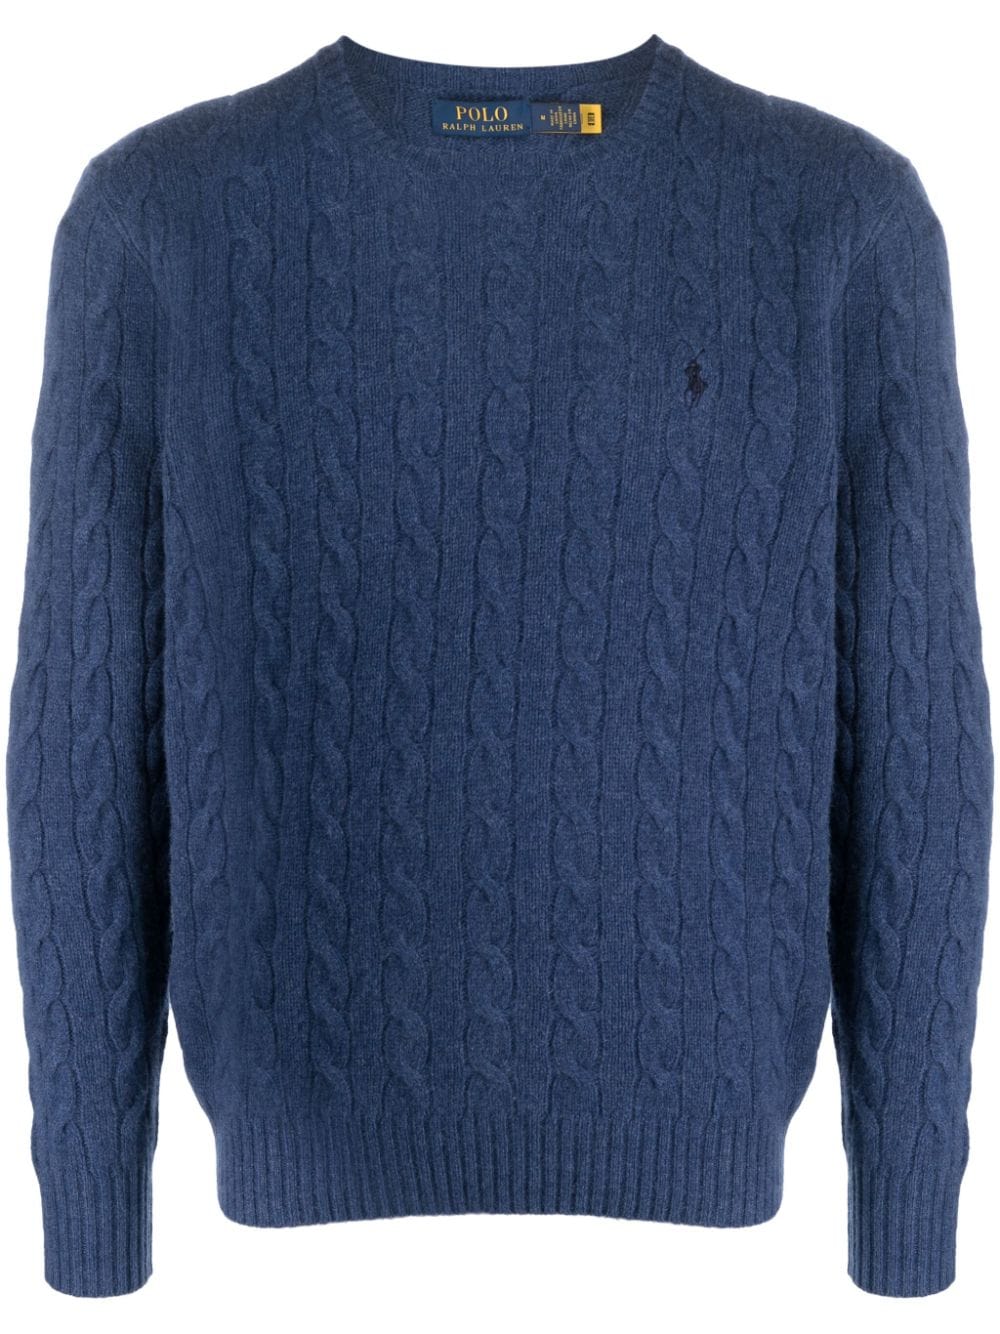 Image 1 of Polo Ralph Lauren embroidered cable-knit jumper